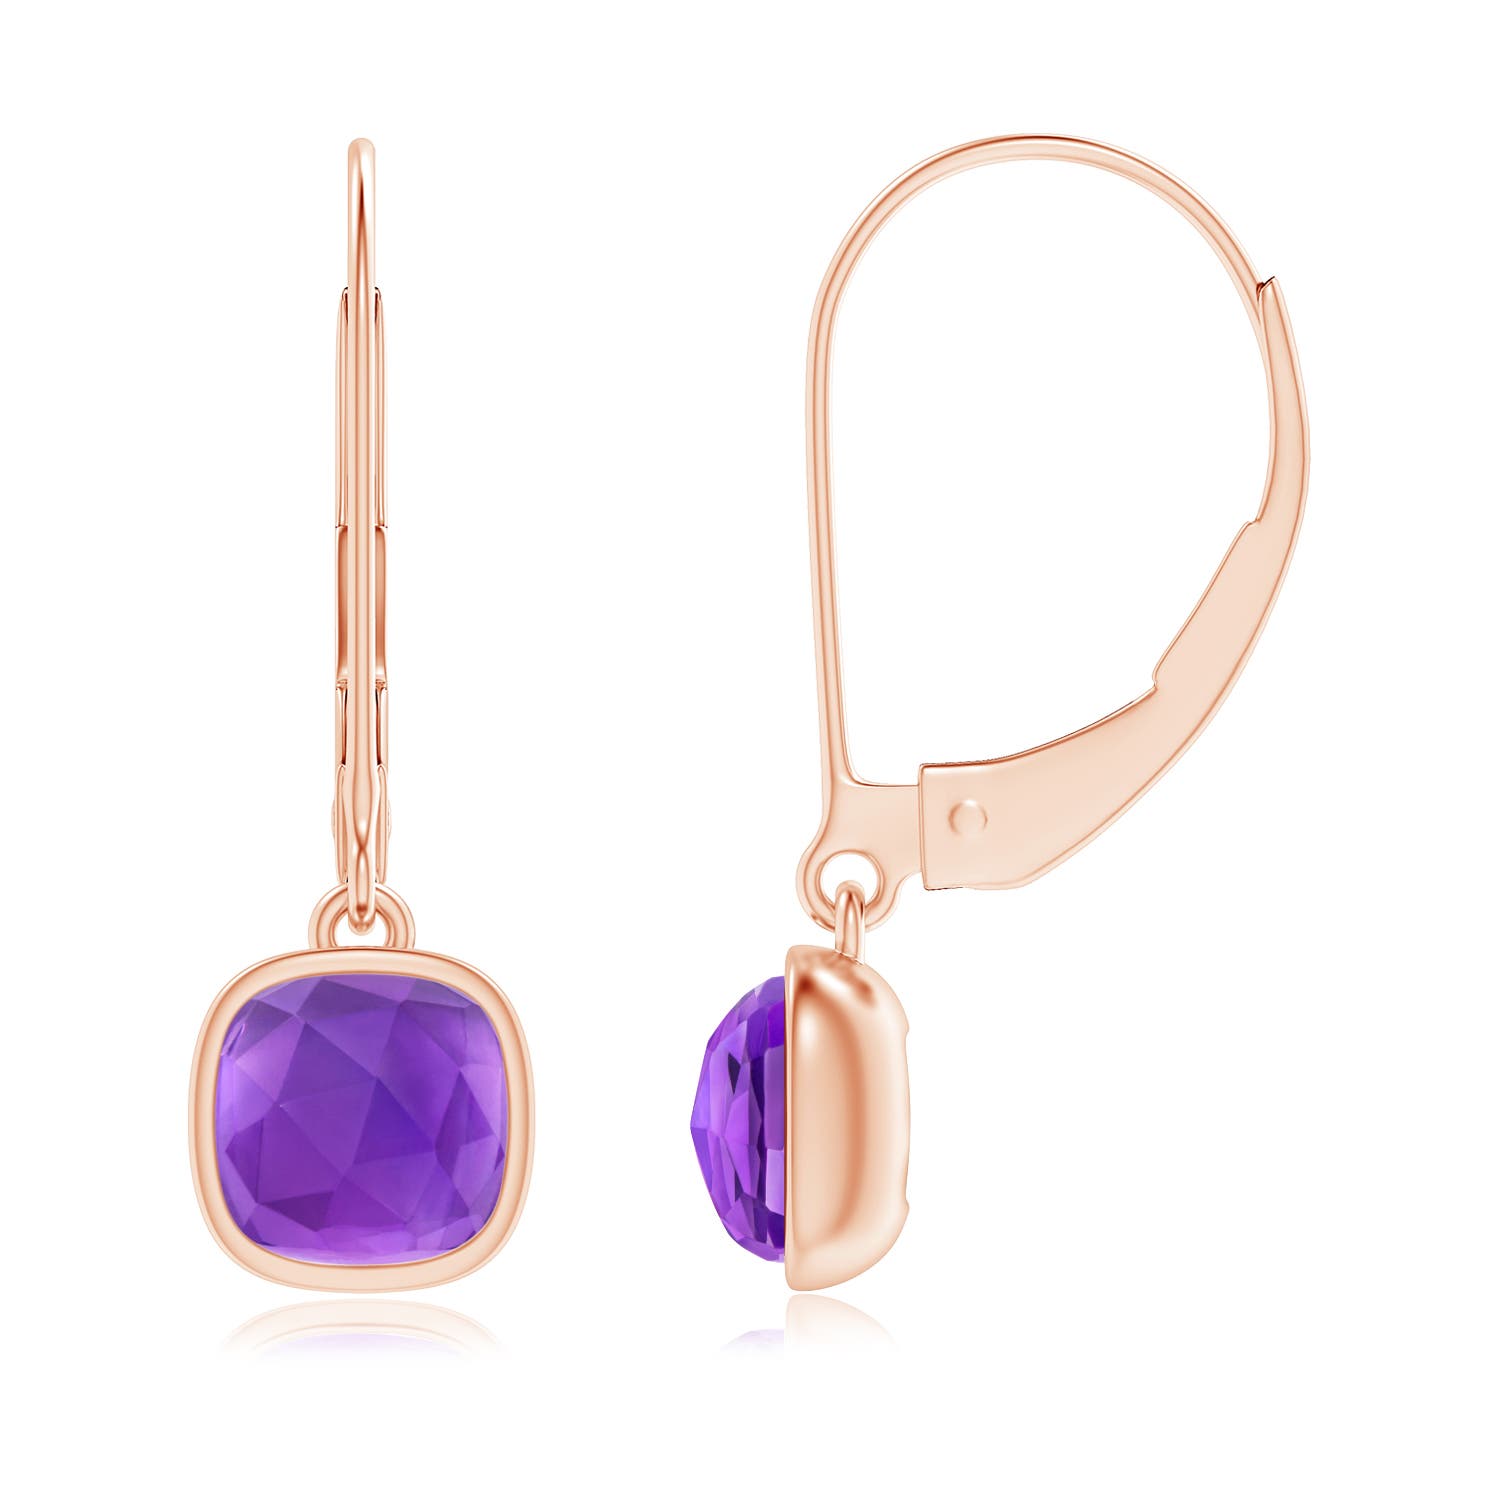 AAA - Amethyst / 1 CT / 14 KT Rose Gold